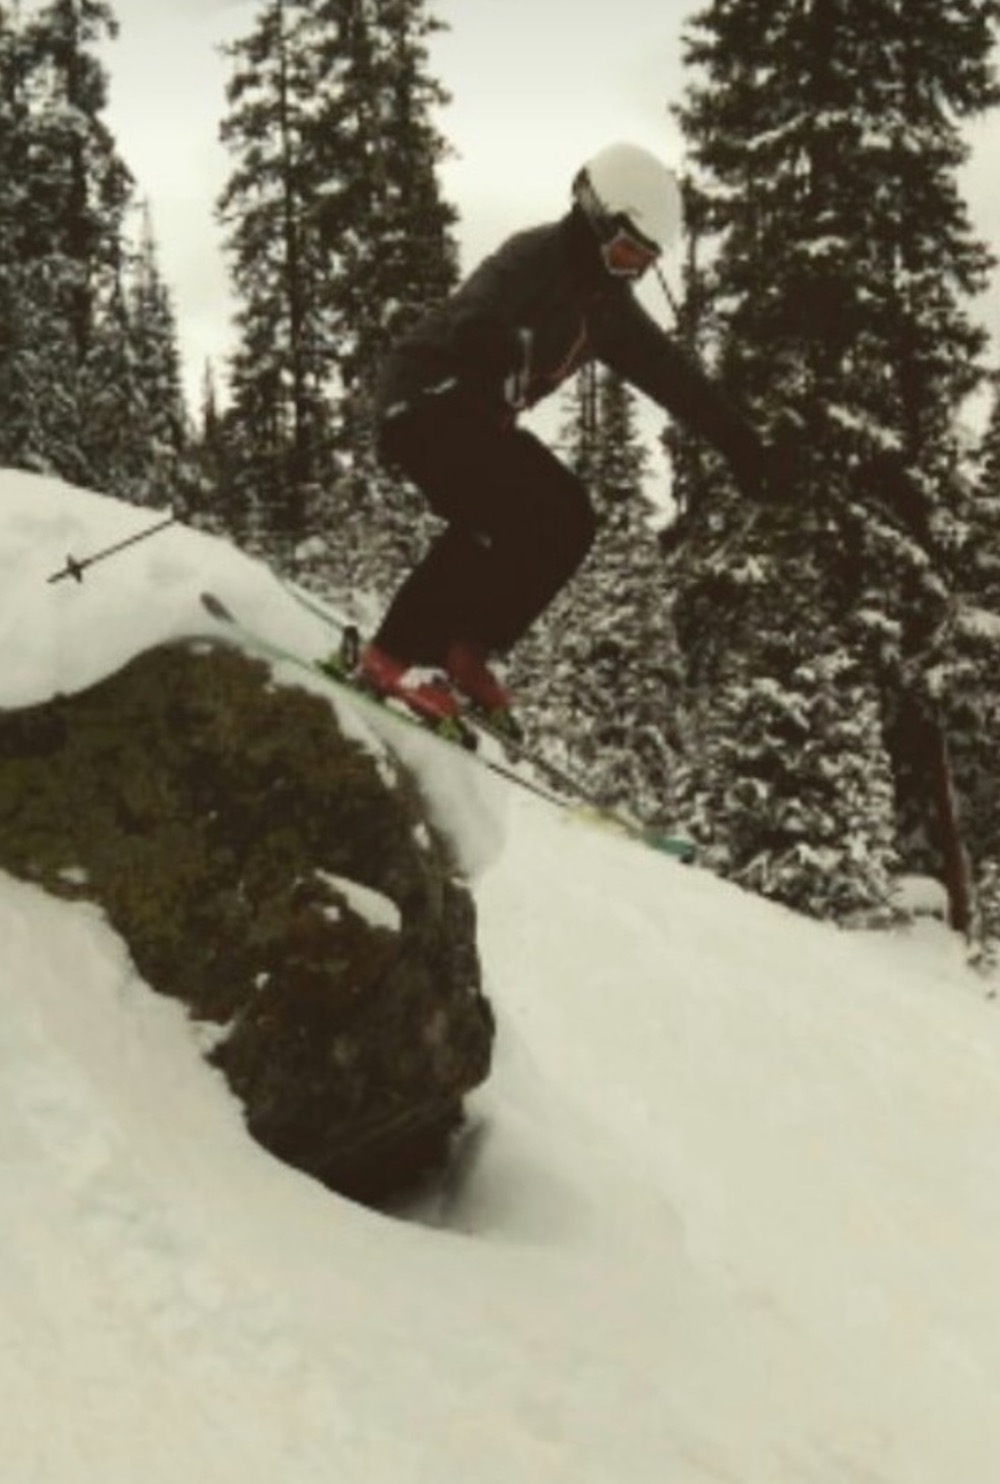 Getting some air at A-Basin